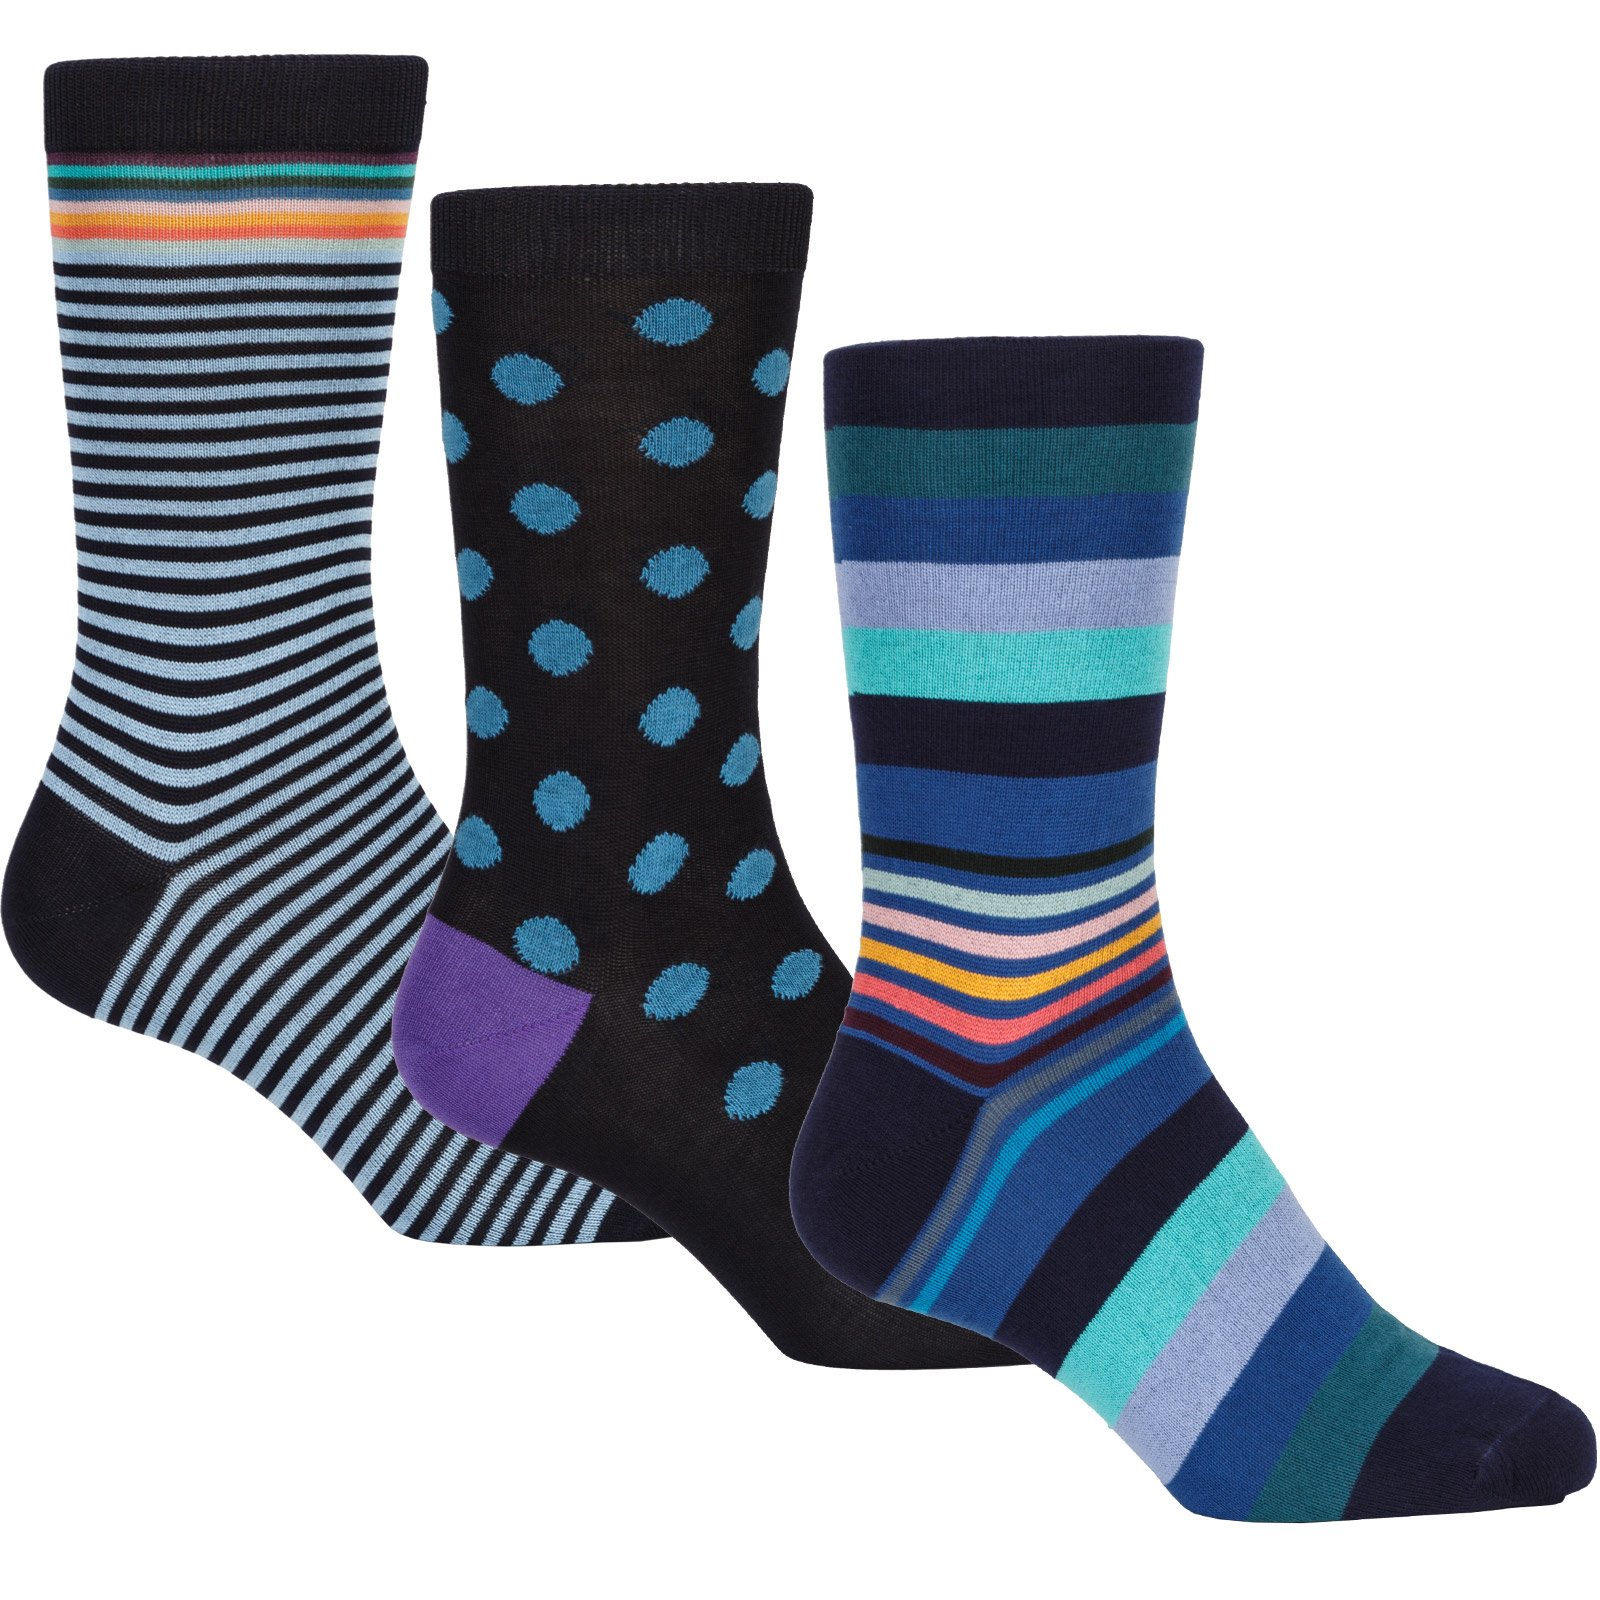 3 Pack Colourful Cotton Socks - Gifts : Fifth Avenue Menswear - PAUL ...